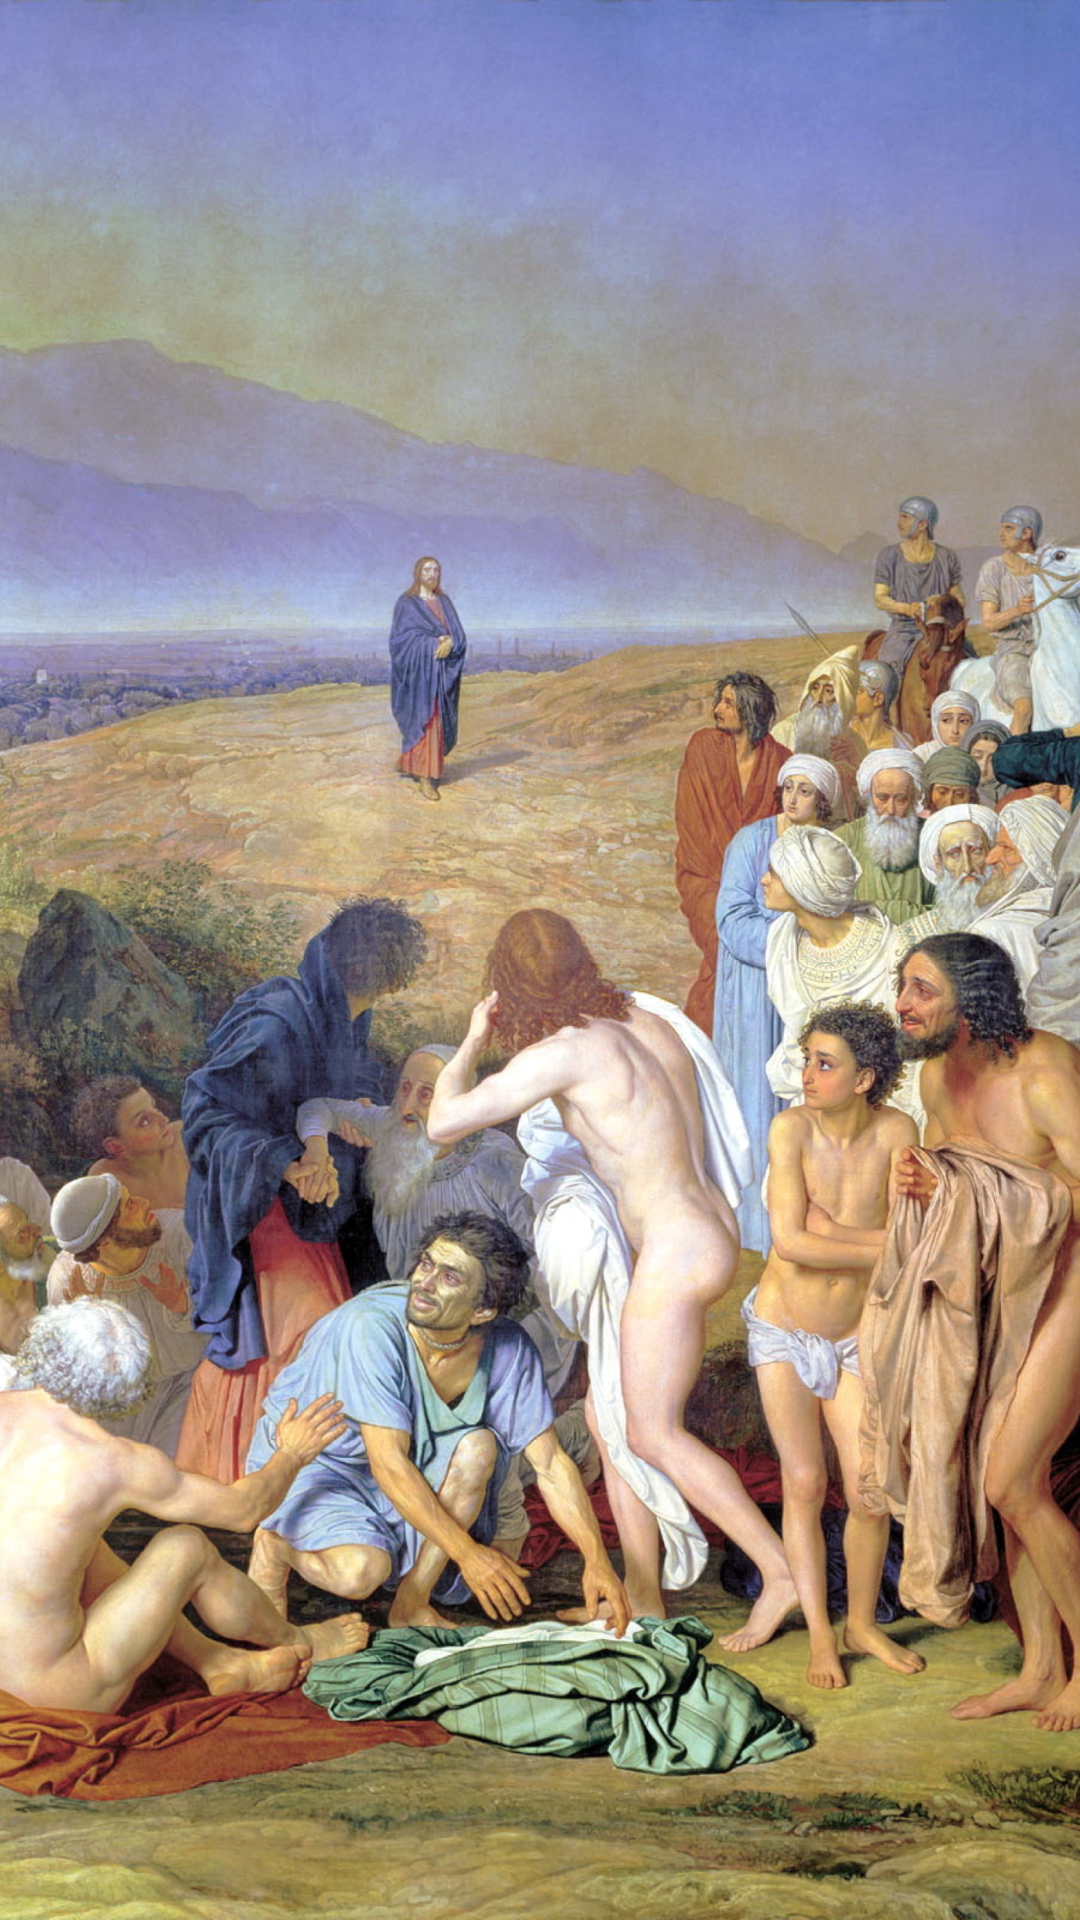 Das Alexander Ivanov Famous Painting - The Appearance Of Christ To The People Wallpaper 1080x1920